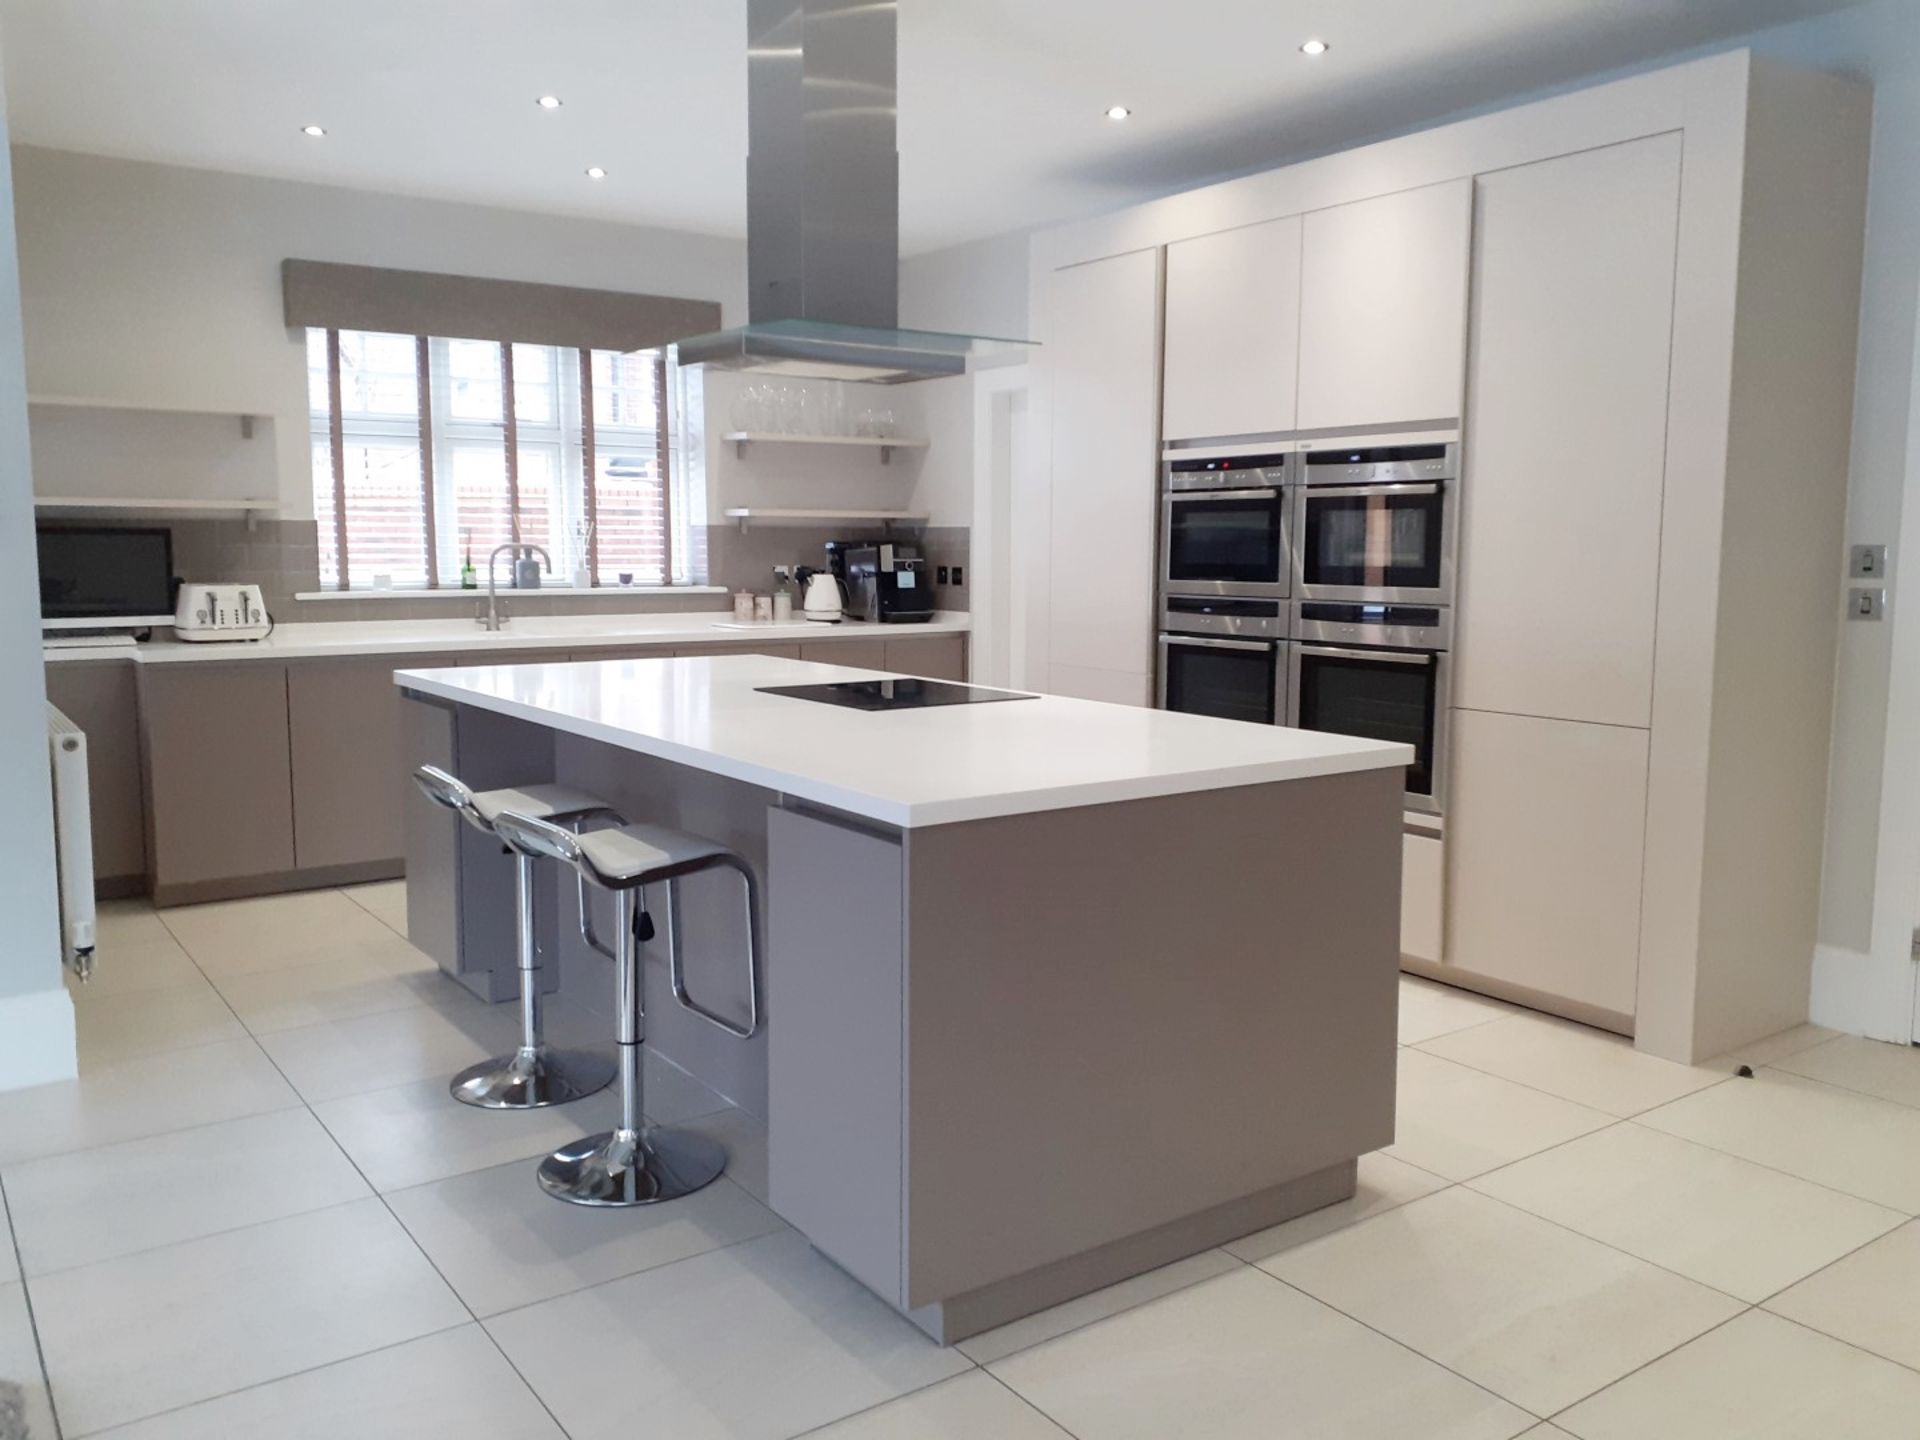 1 x SieMatic Handleless Fitted Kitchen With Intergrated NEFF Appliances, Corian Worktops And Island